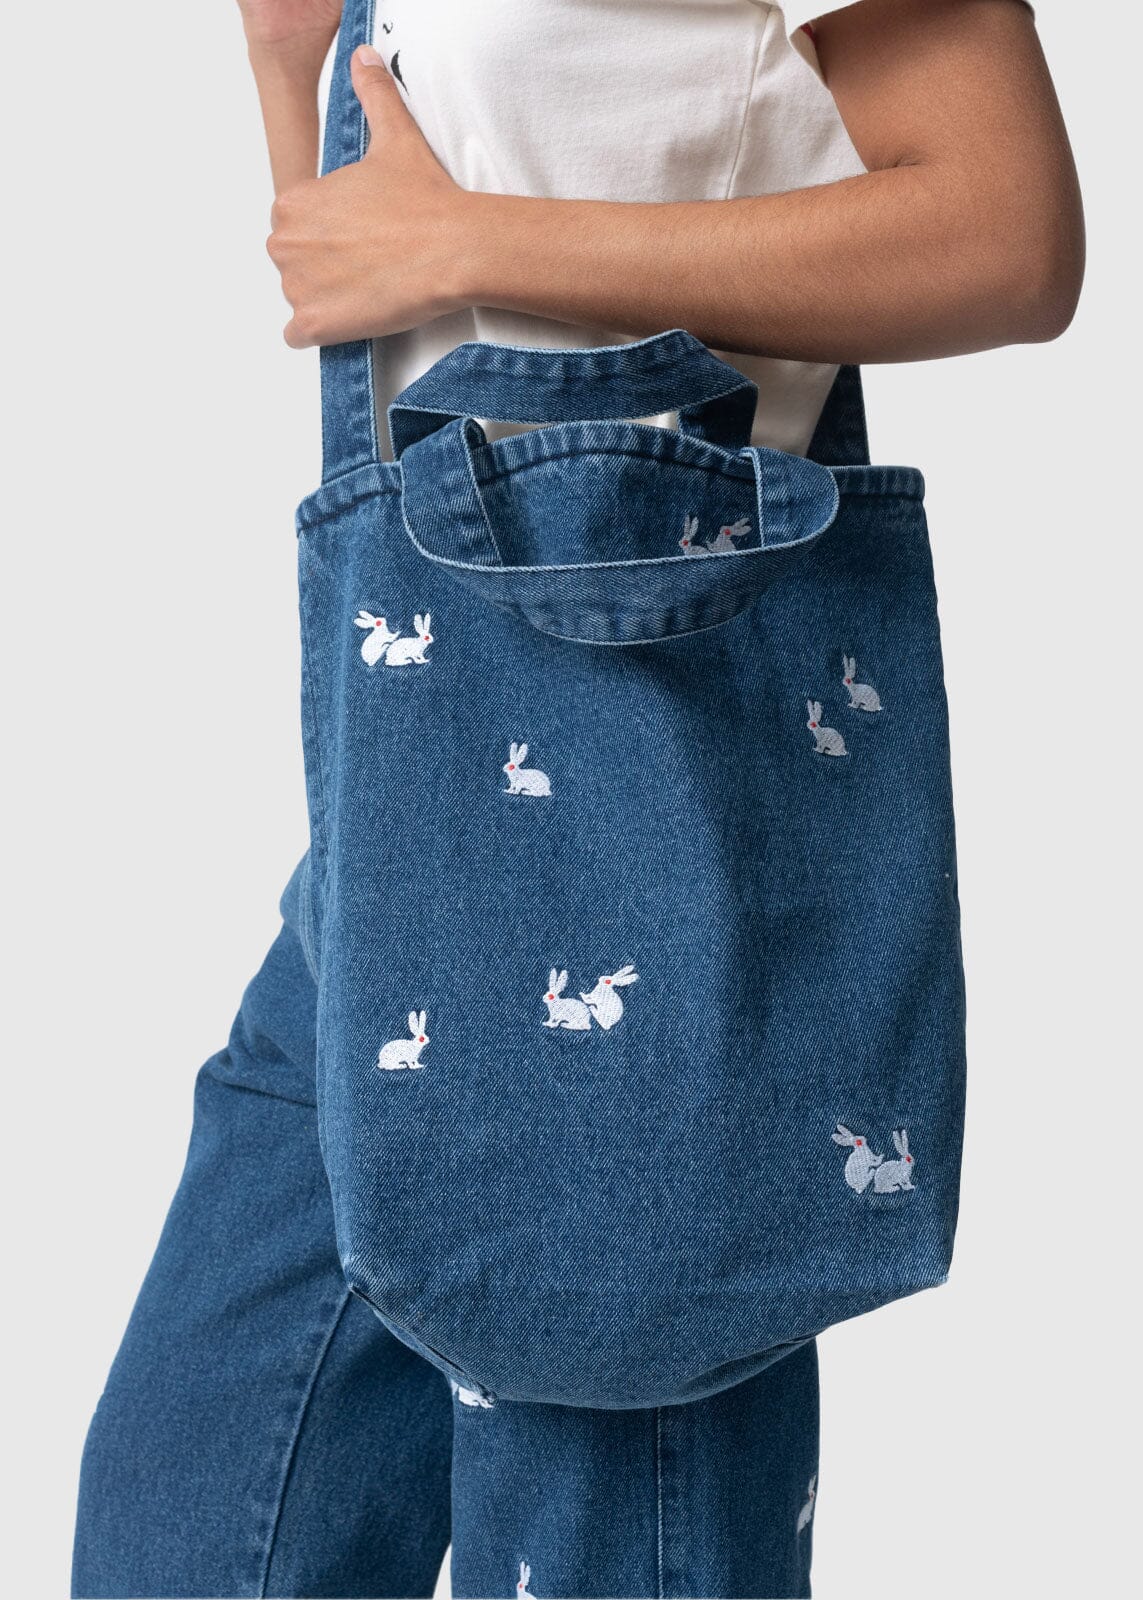 Carne Bollente Bags Bunny Tote Bag - Washed Blue Tote Bag Carne Bollente 